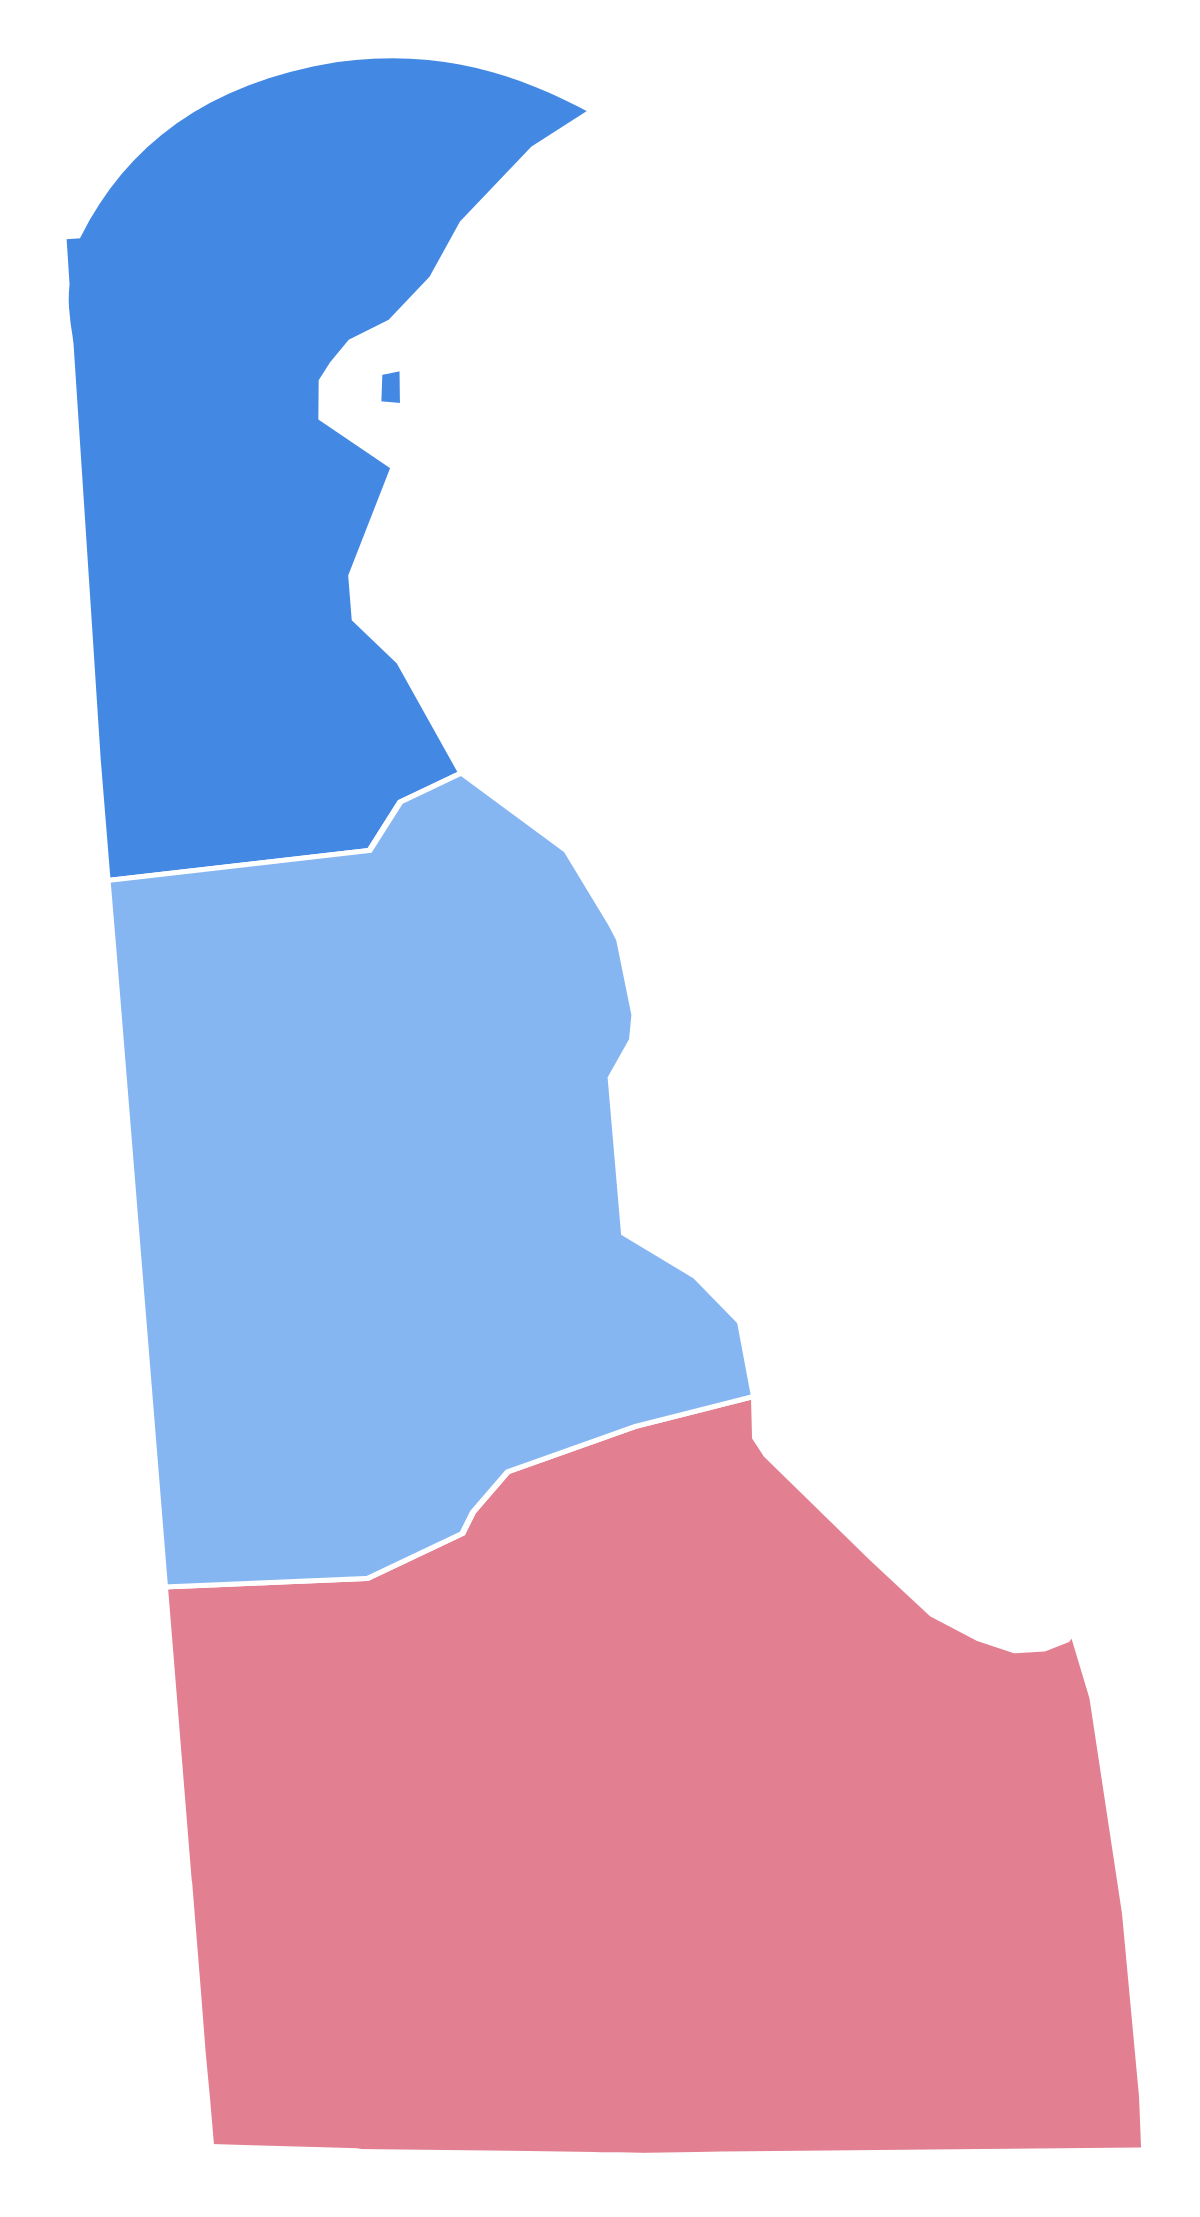 File:Delaware Insurance Commissioner election, 2016 results by county.svg - Wikimedia Commons